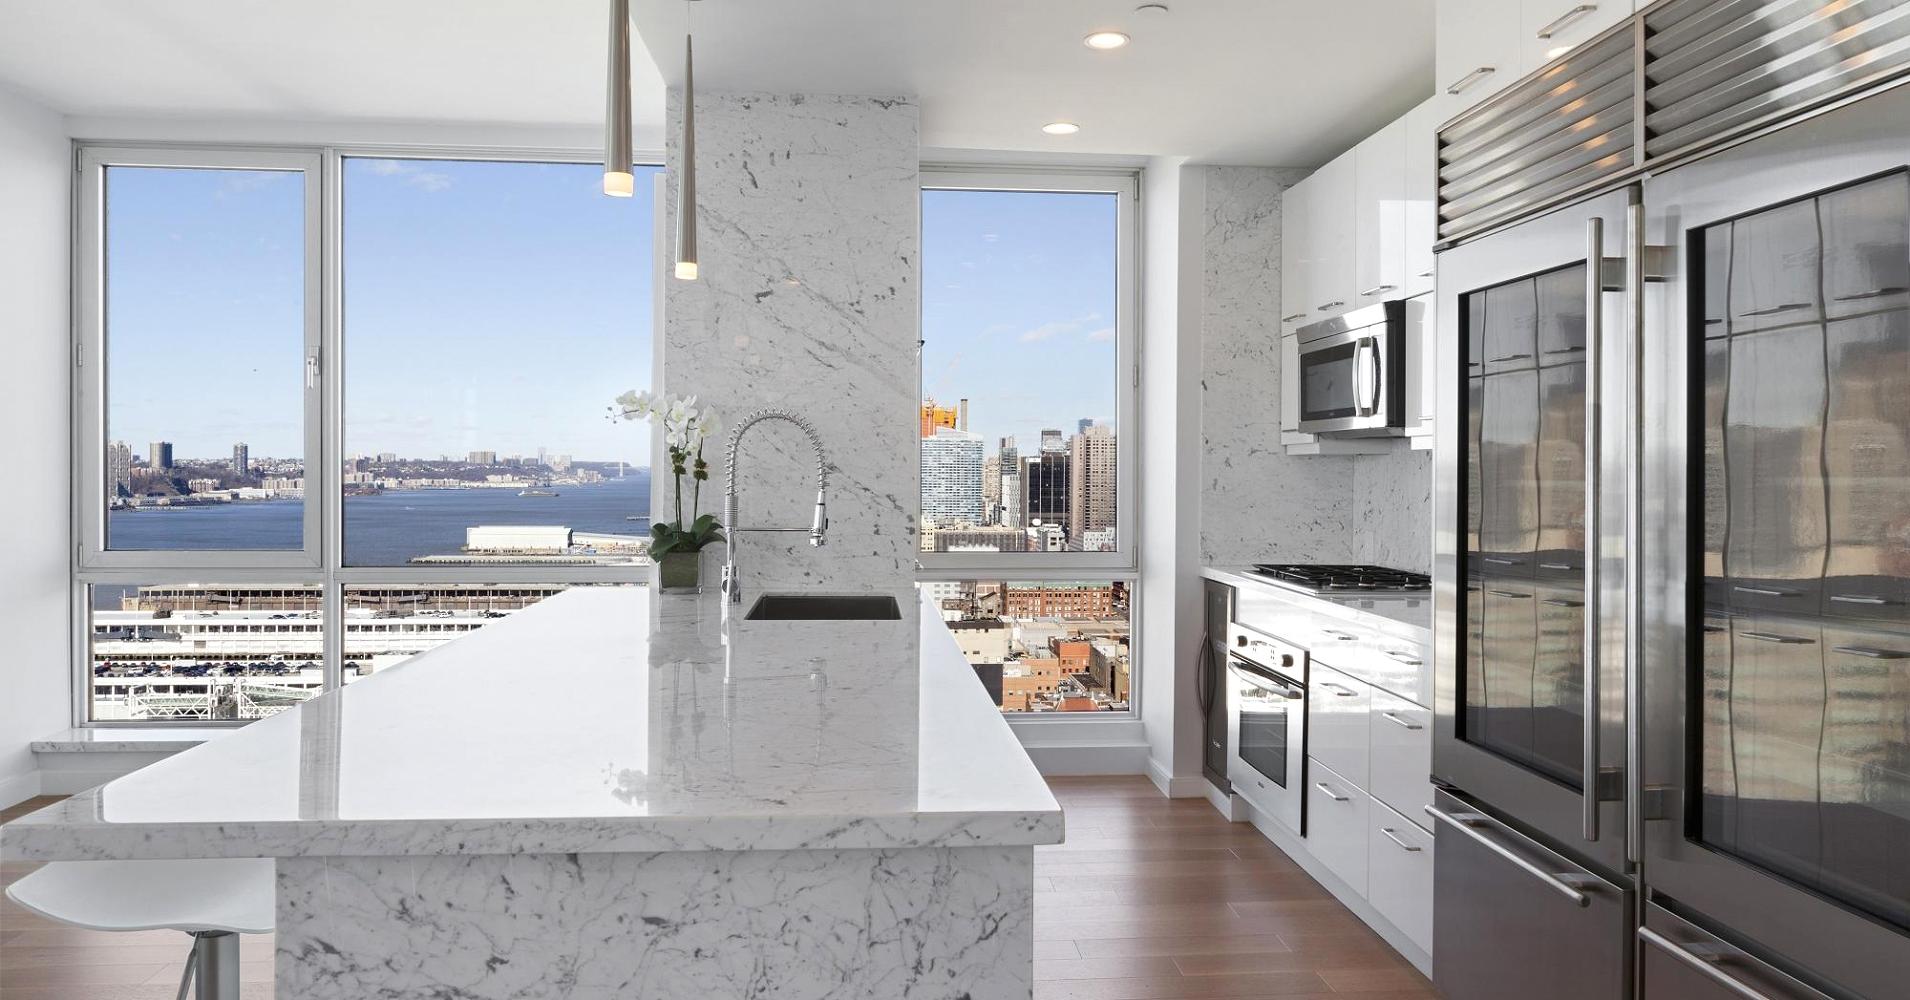 This $85 million NYC penthouse comes with a trip to space and court-side NBA season tickets